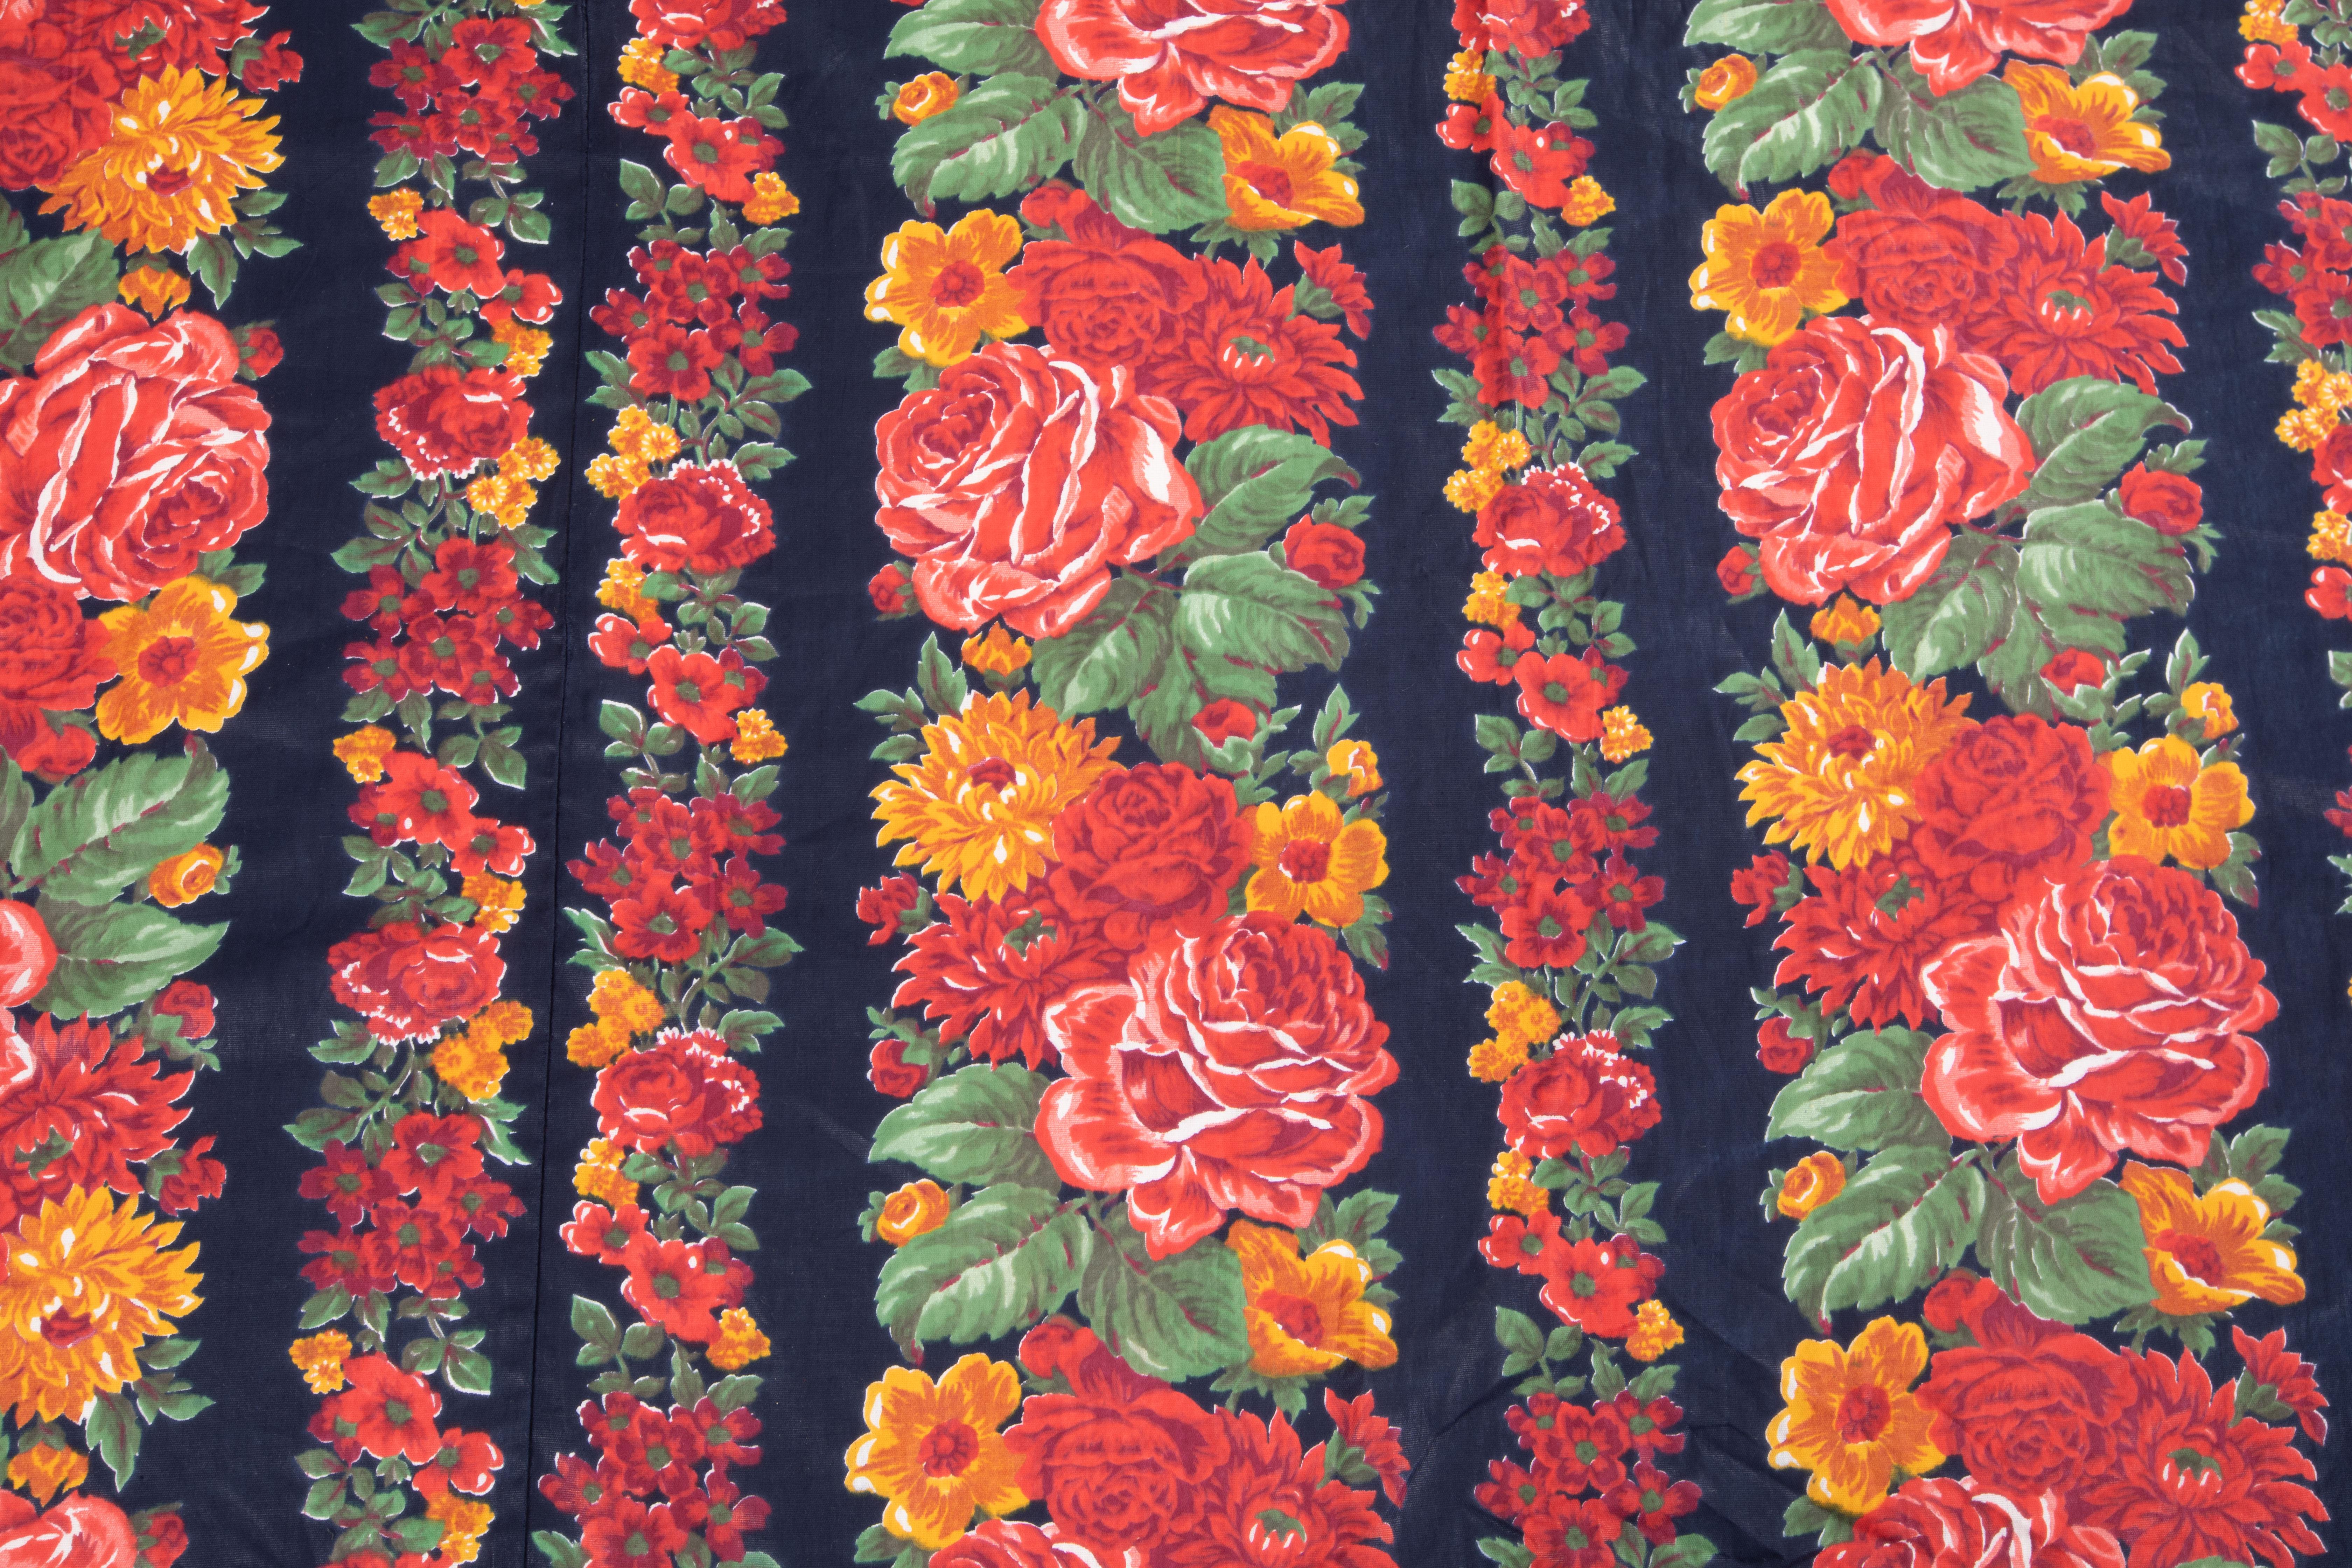 Russian Roller Printed Cotton Fabric Panel, Mid-20th Century or Earlier For Sale 1